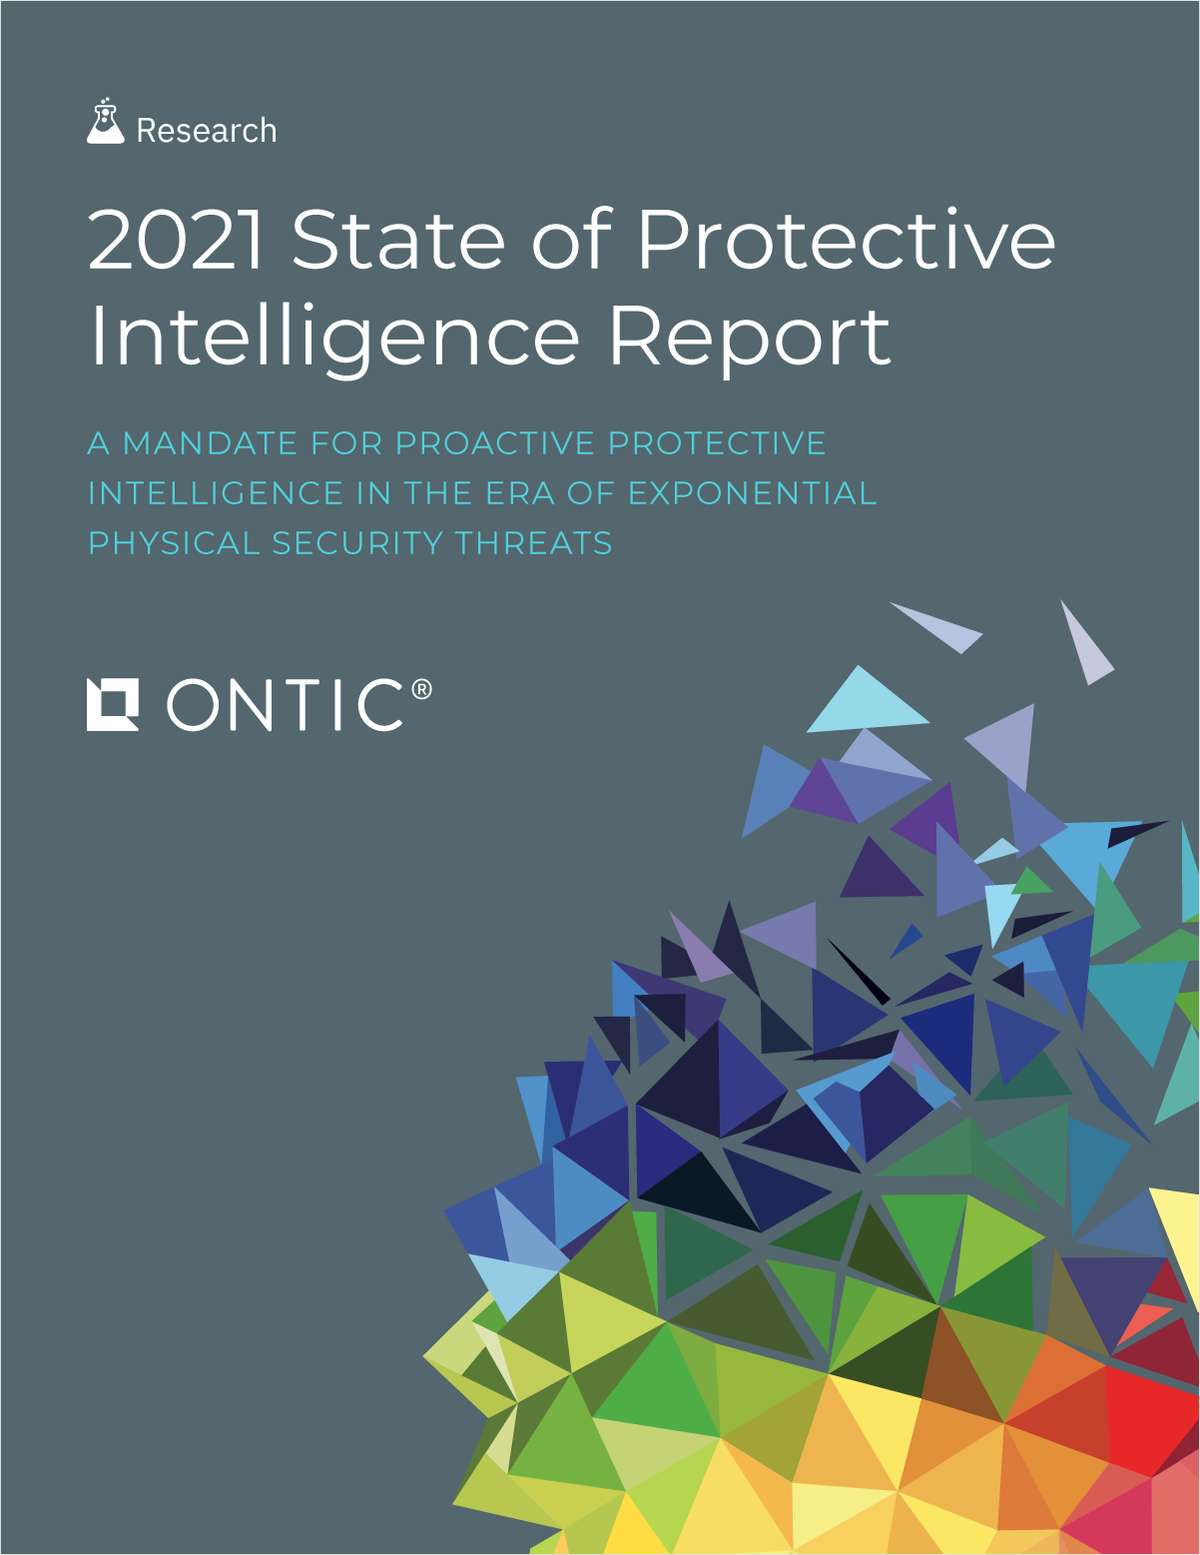 The 2021 State of Protective Intelligence Report